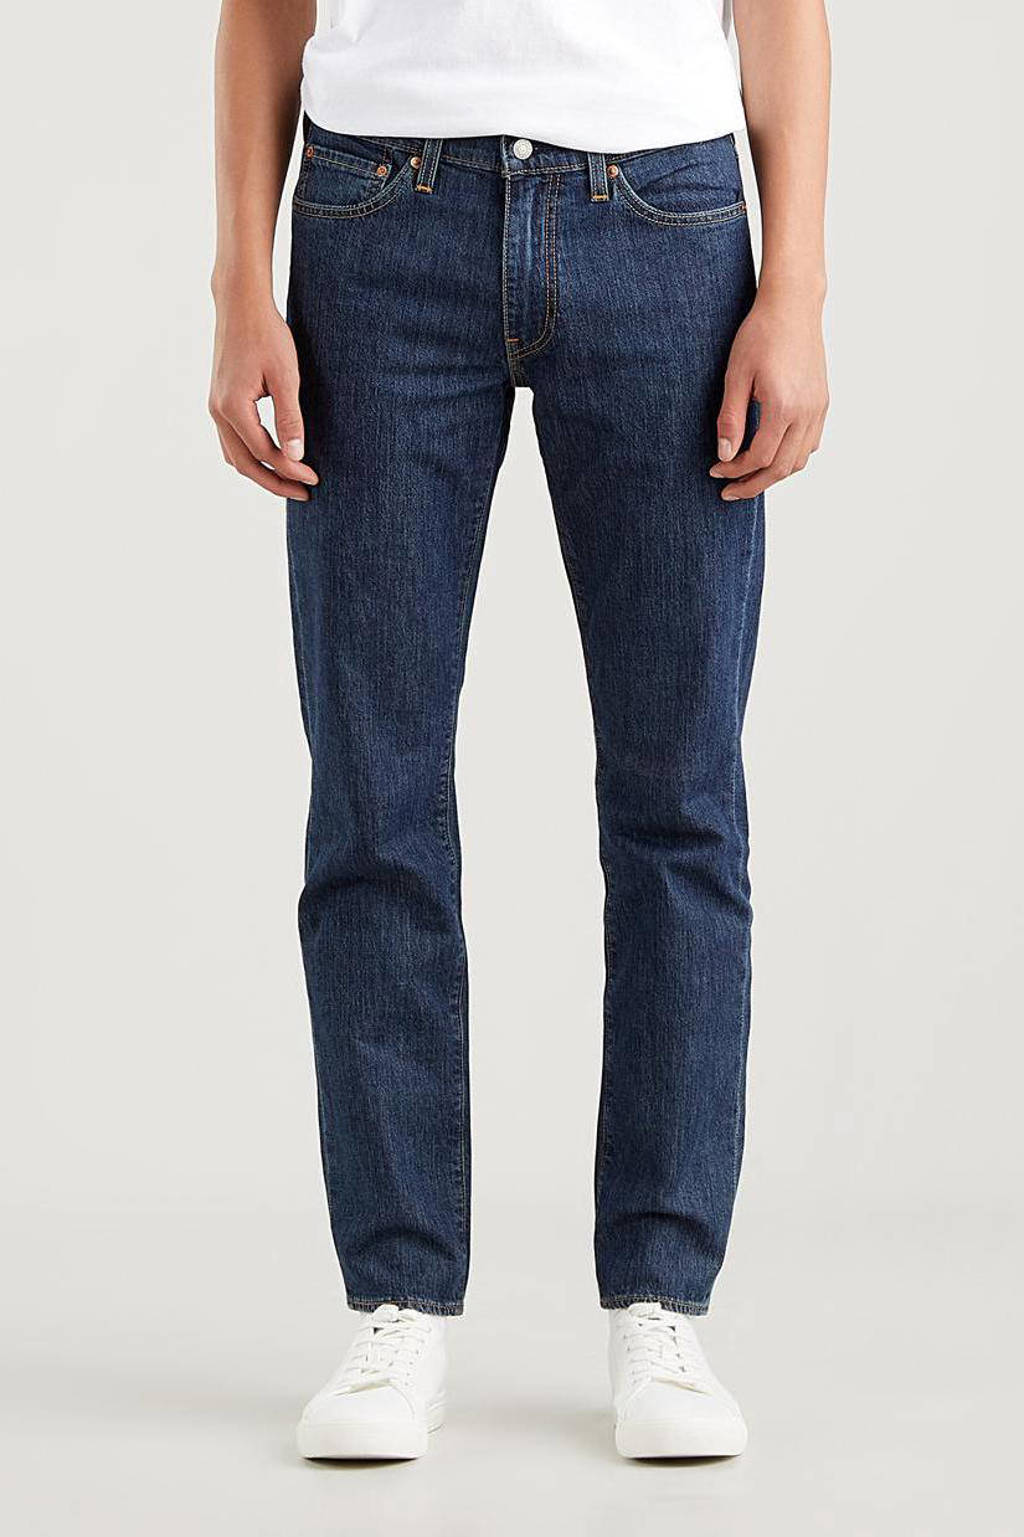 Levi's 511 slim fit jeans stormy cool, Stormy cool